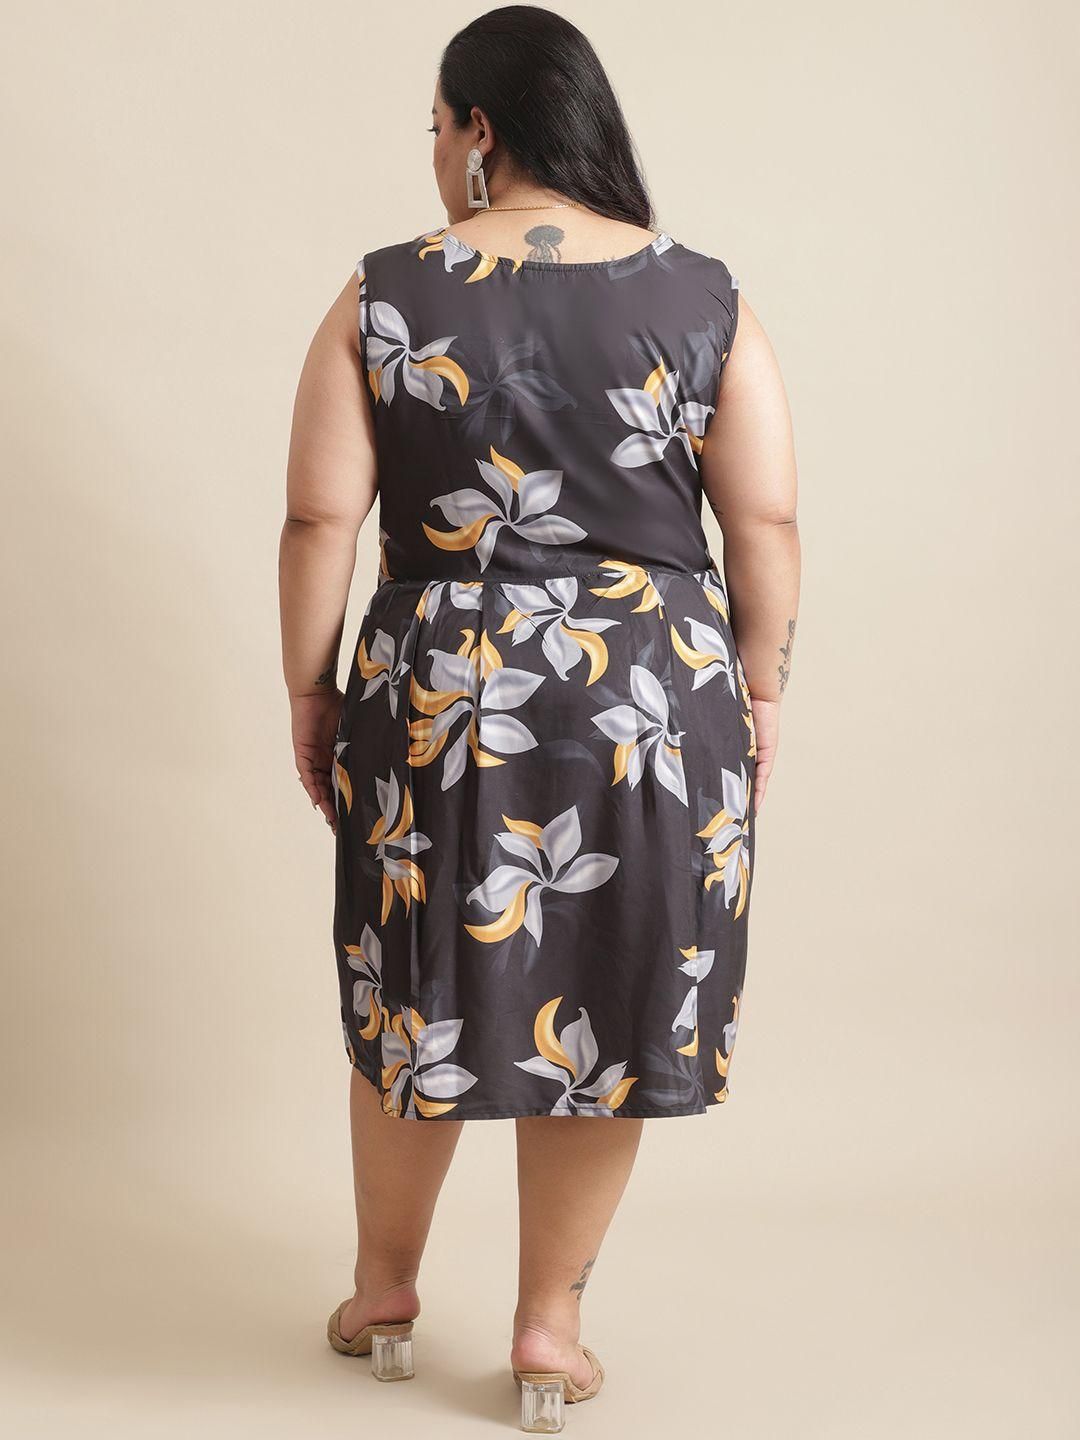 Flambeur Plus Size Floral Flared Short Dress for Women